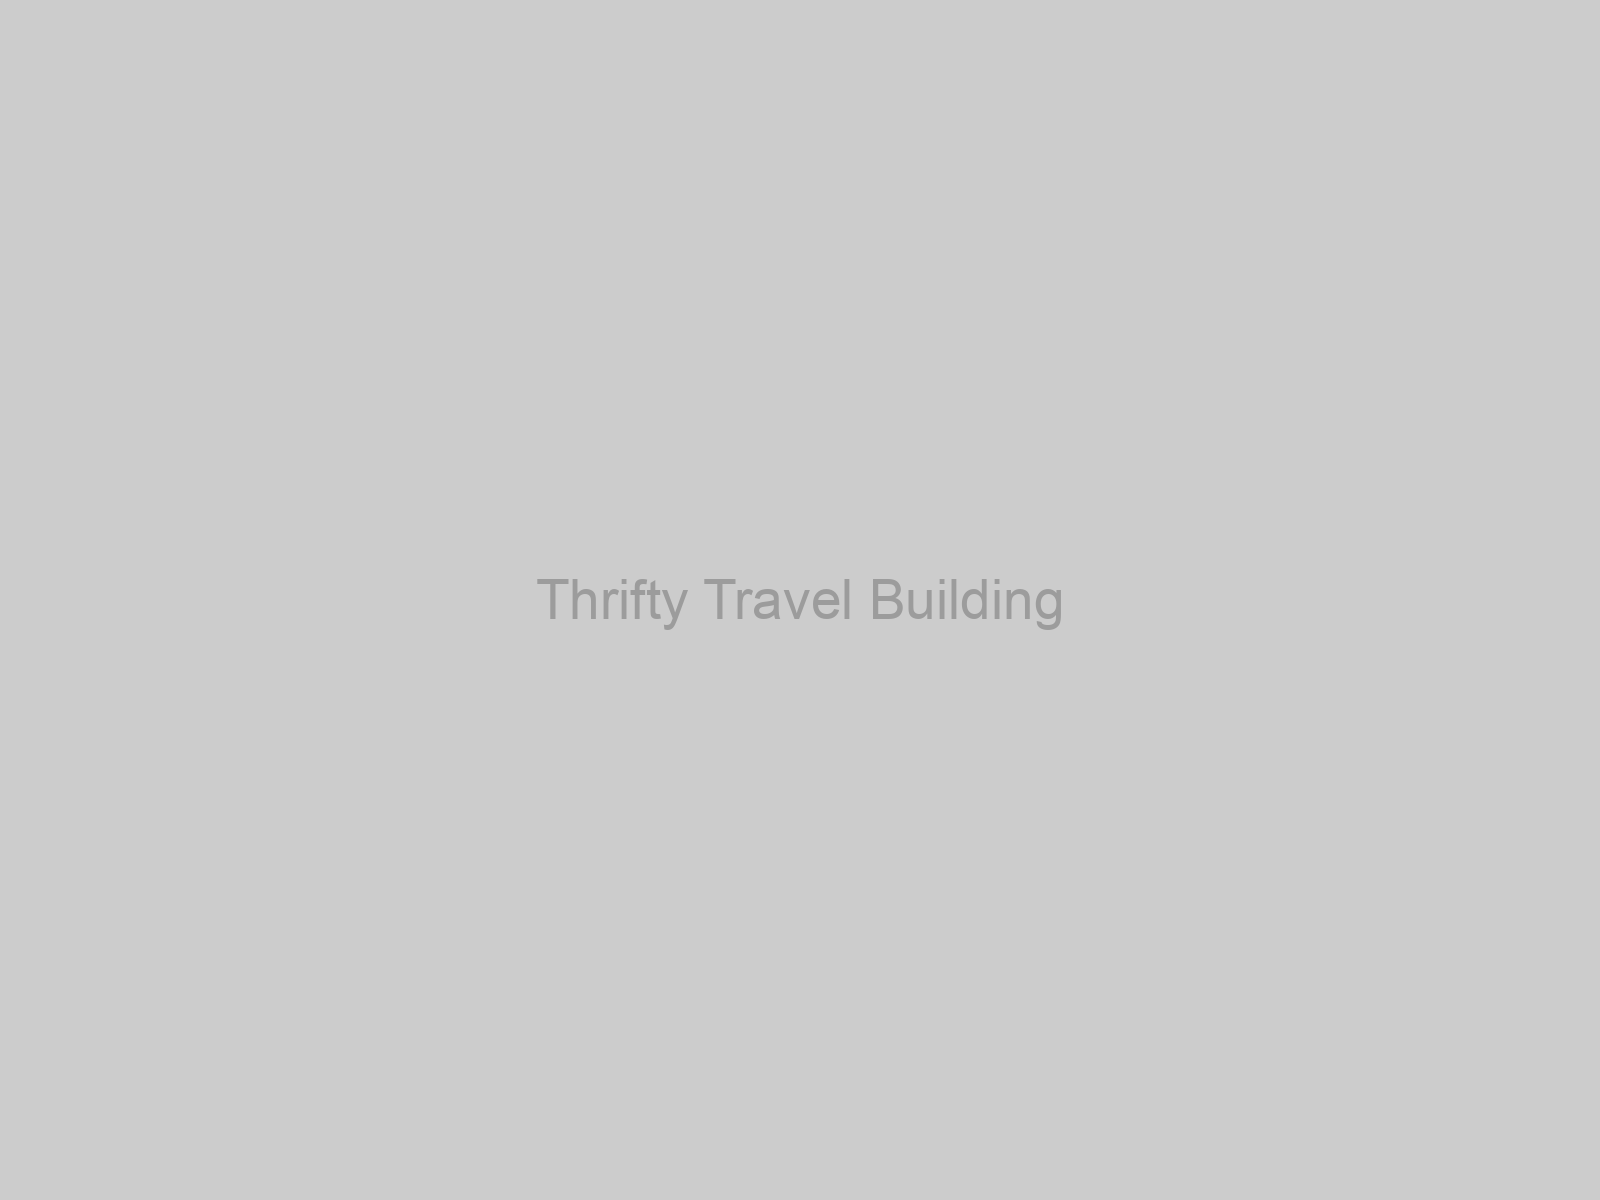 Thrifty Travel Building